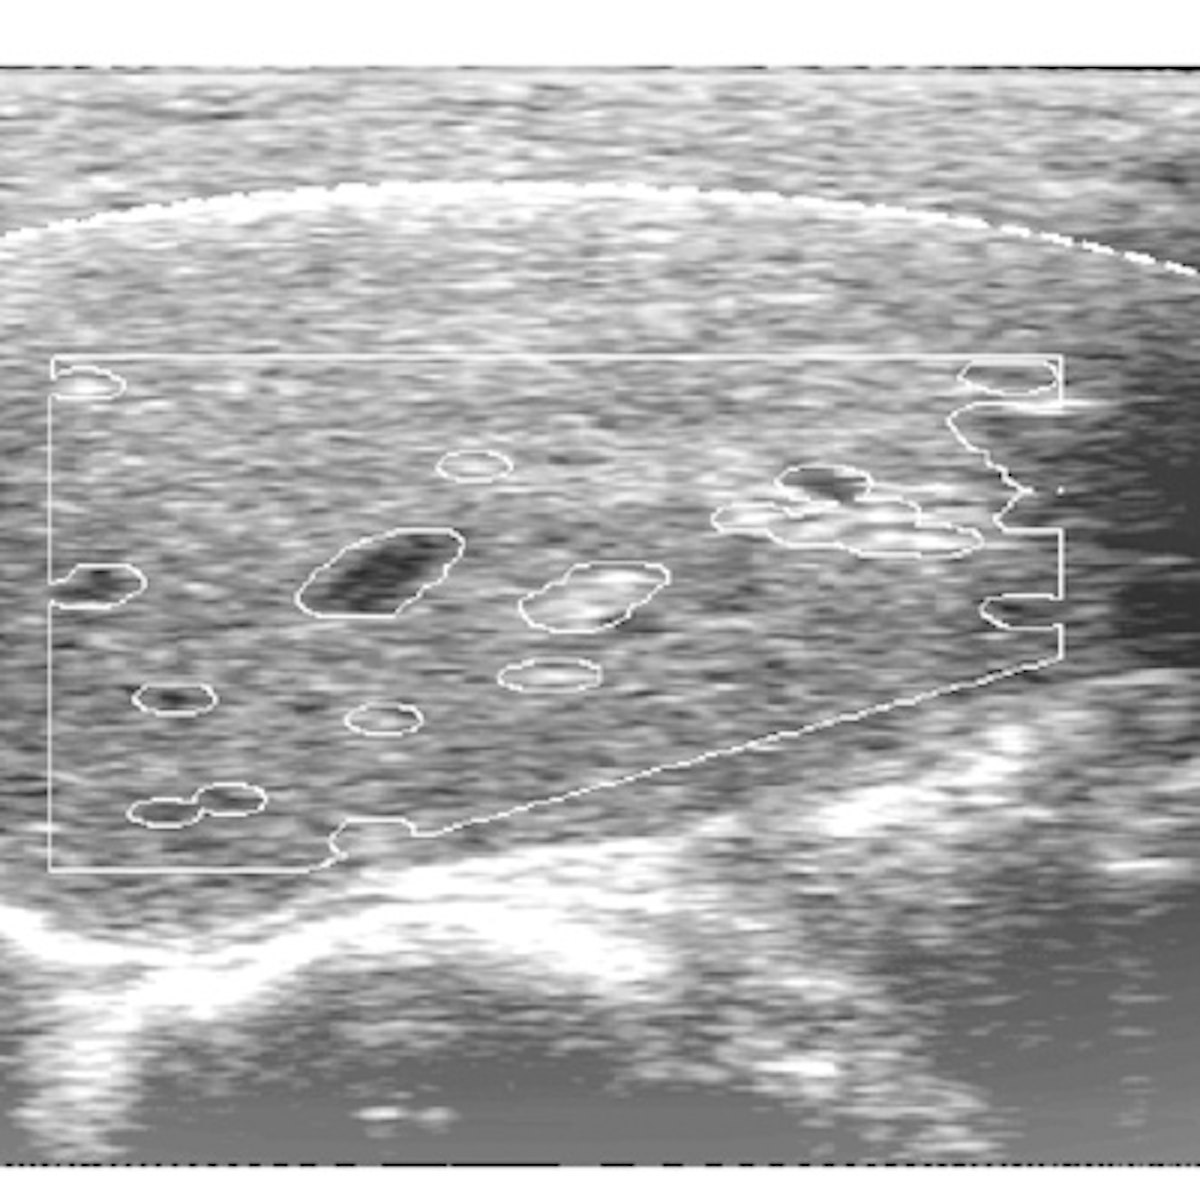 Ultrasound can be alternative for biopsy in liver disease patients